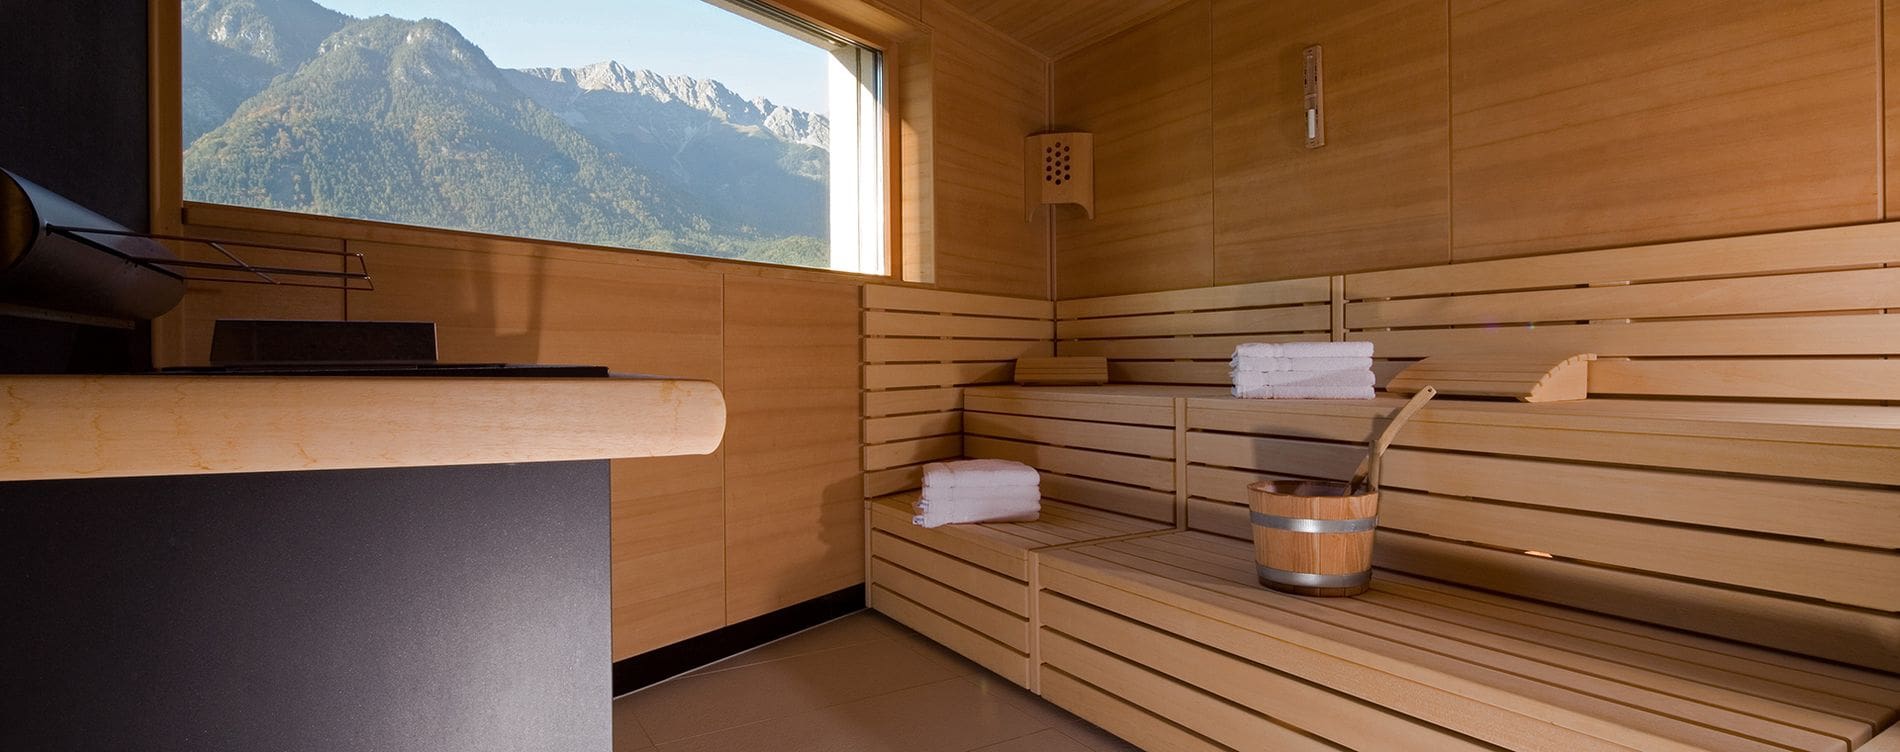 Inside the sauna at Penz Hotel West with a view of the mountains.